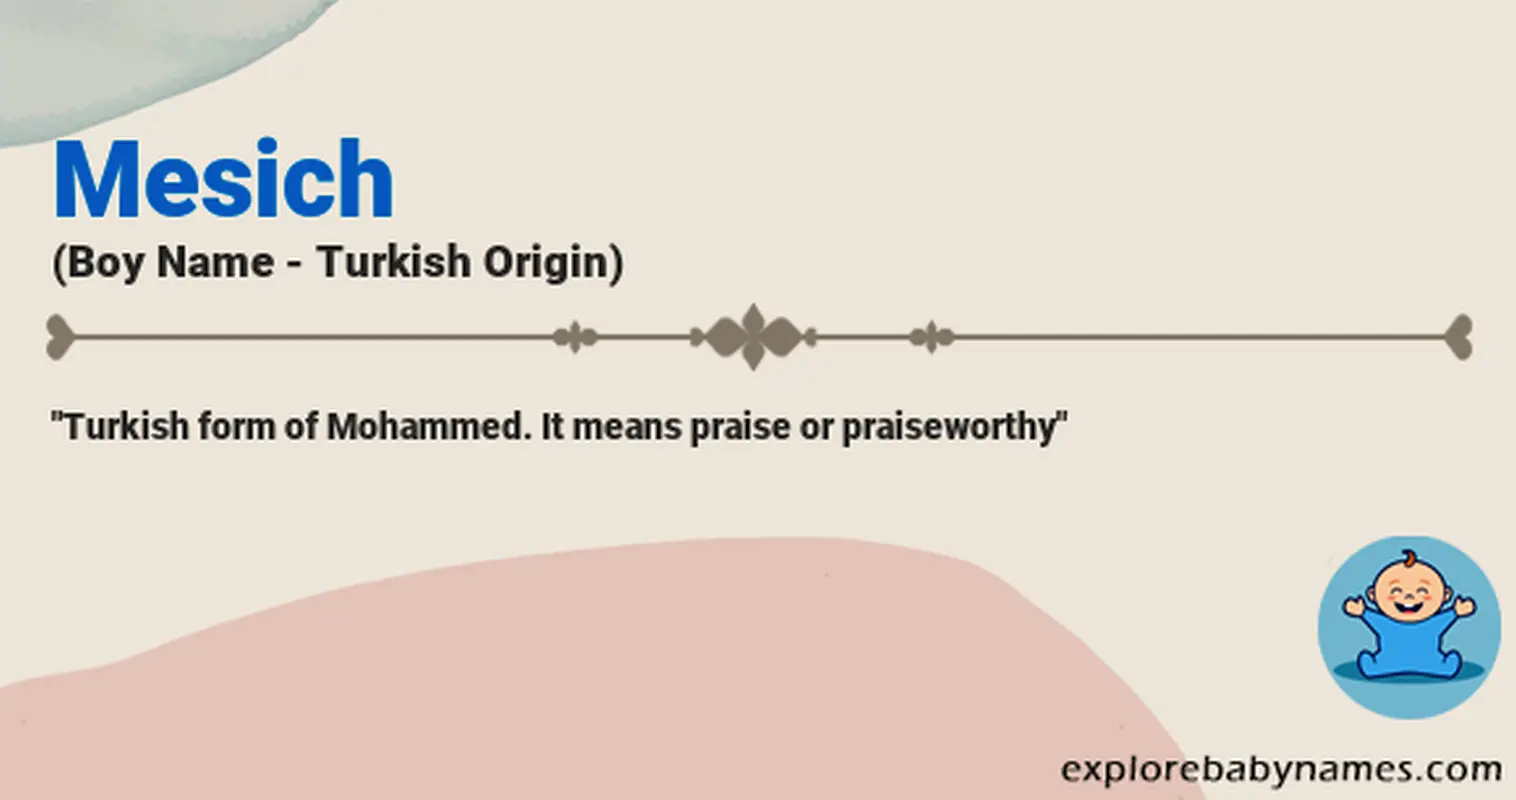 Meaning of Mesich